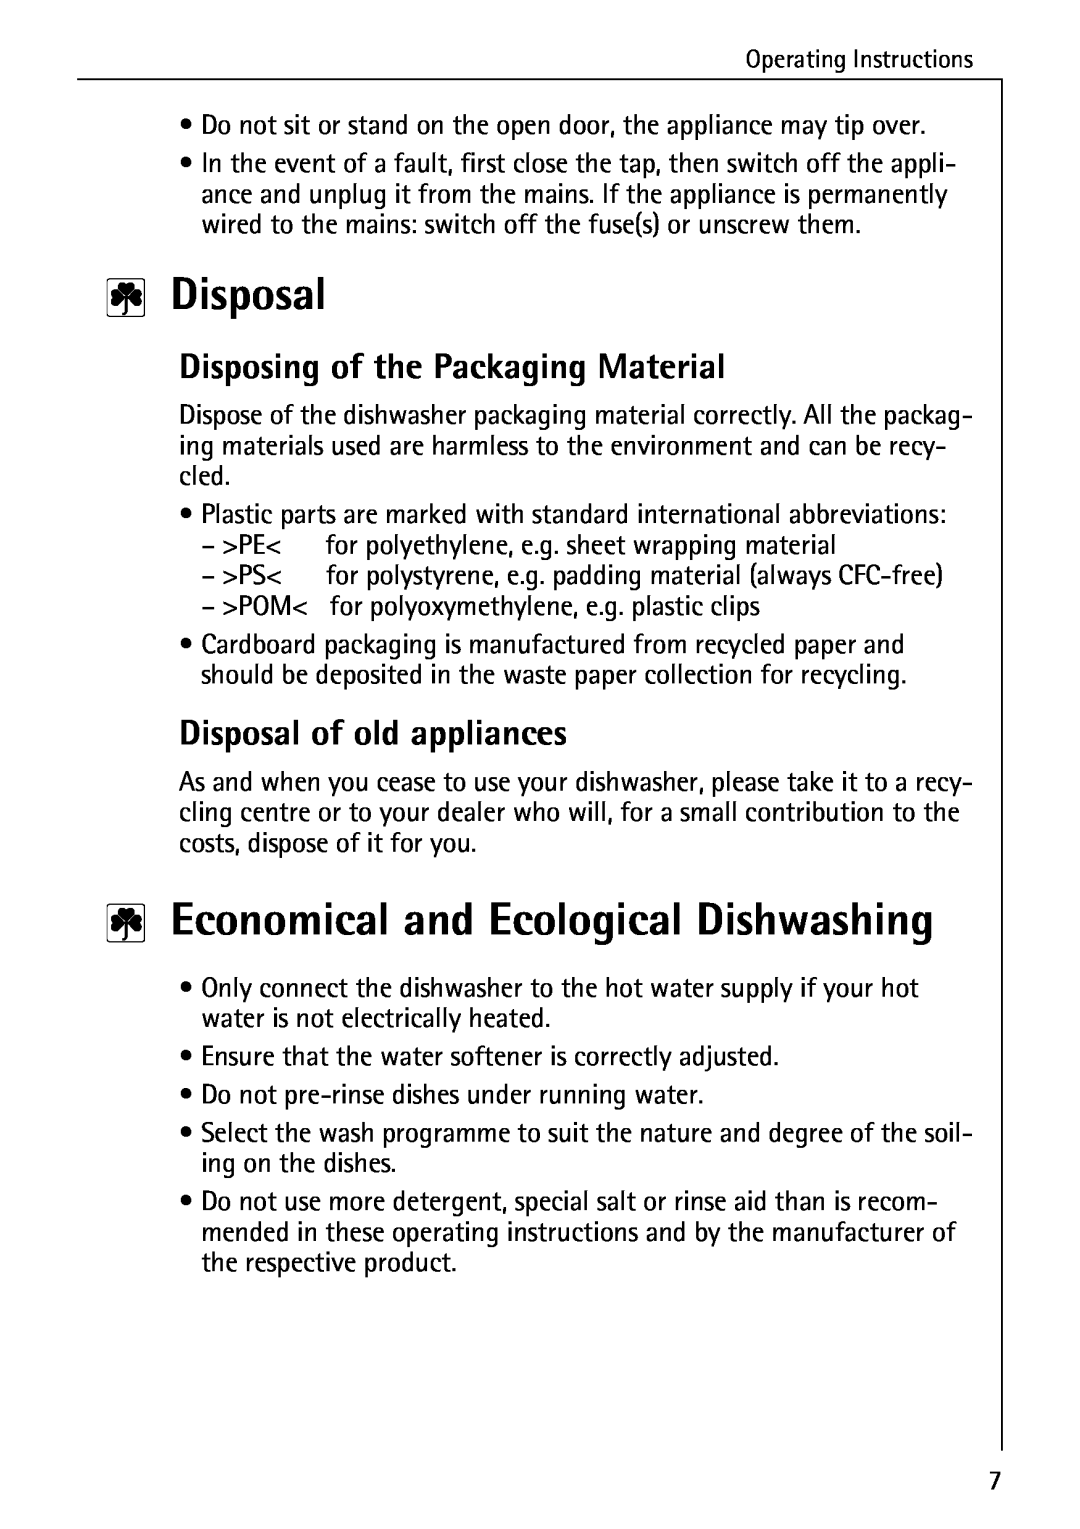 AEG 40360 I manual 2Disposal, 2Economical and Ecological Dishwashing, Disposing of the Packaging Material 